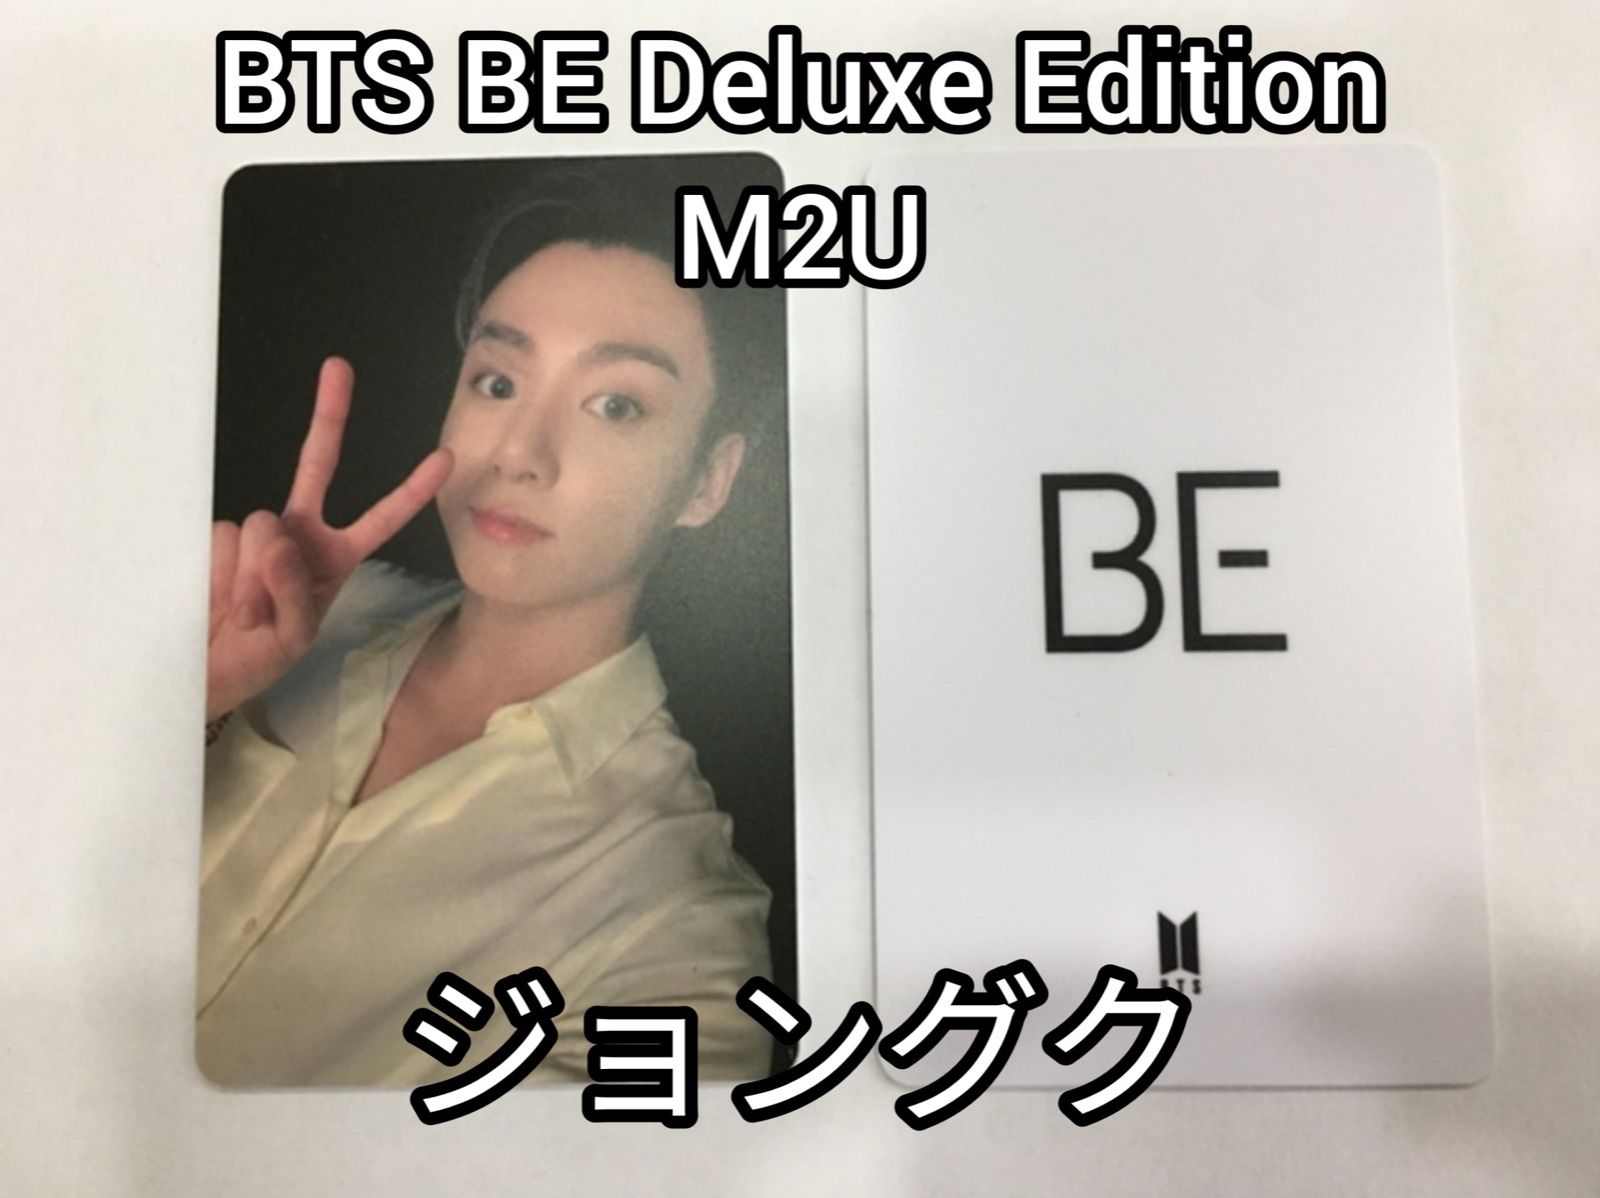 BTS BE deluxe edition ラッキードロー ラキドロ ジョングク - www